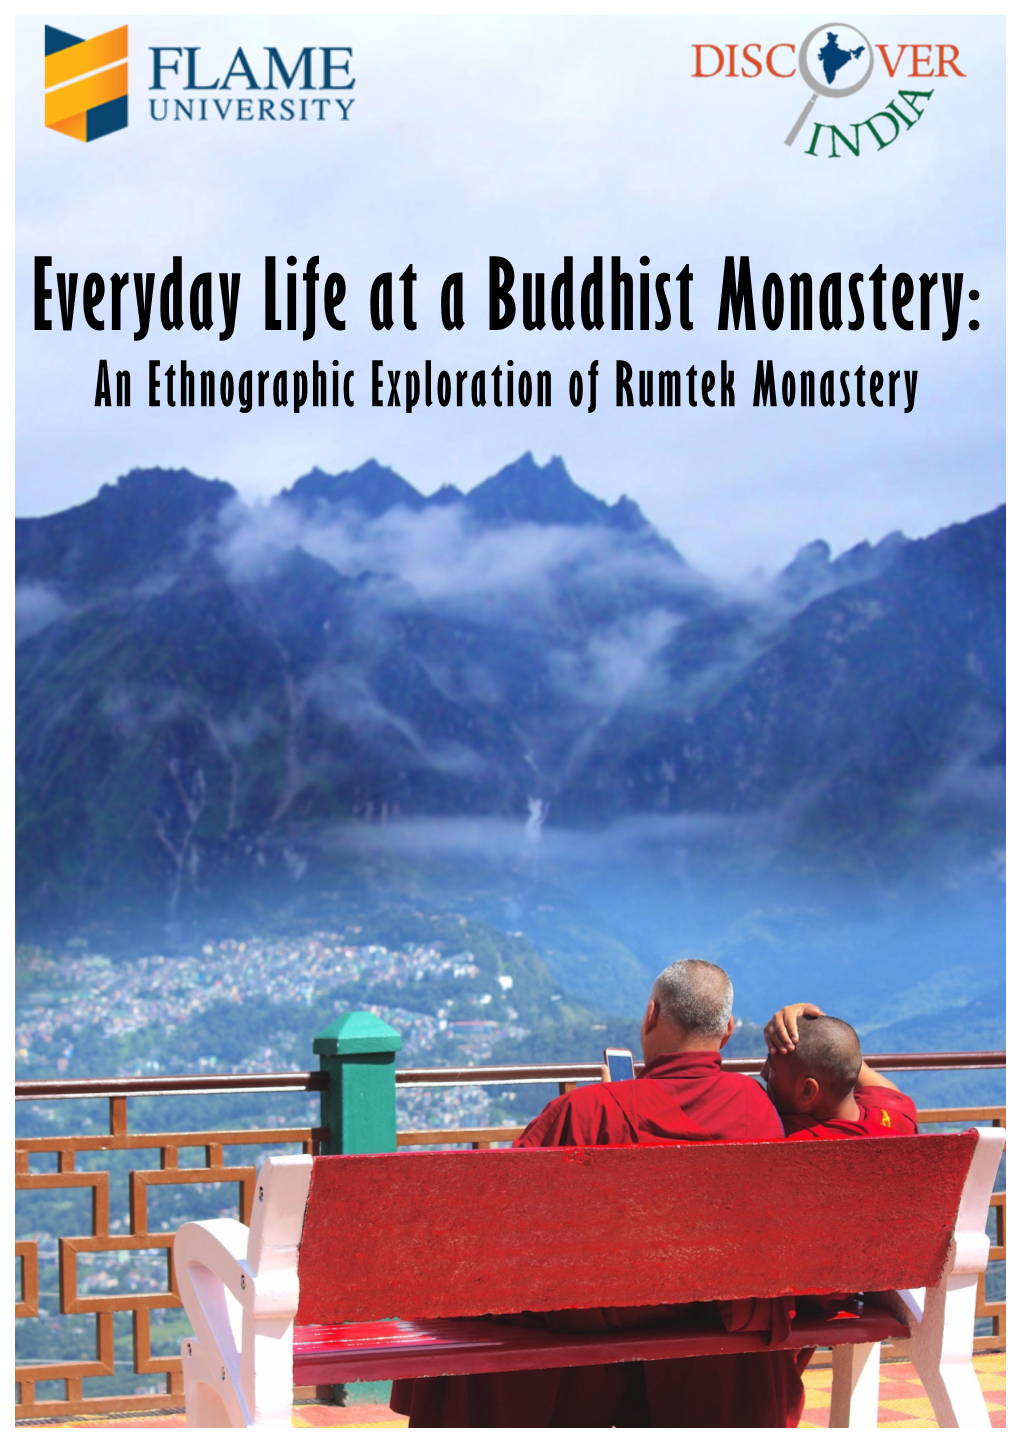 Everyday Life at a Buddhist Monastery: an Ethnographic Exploration of Rumtek Monastery